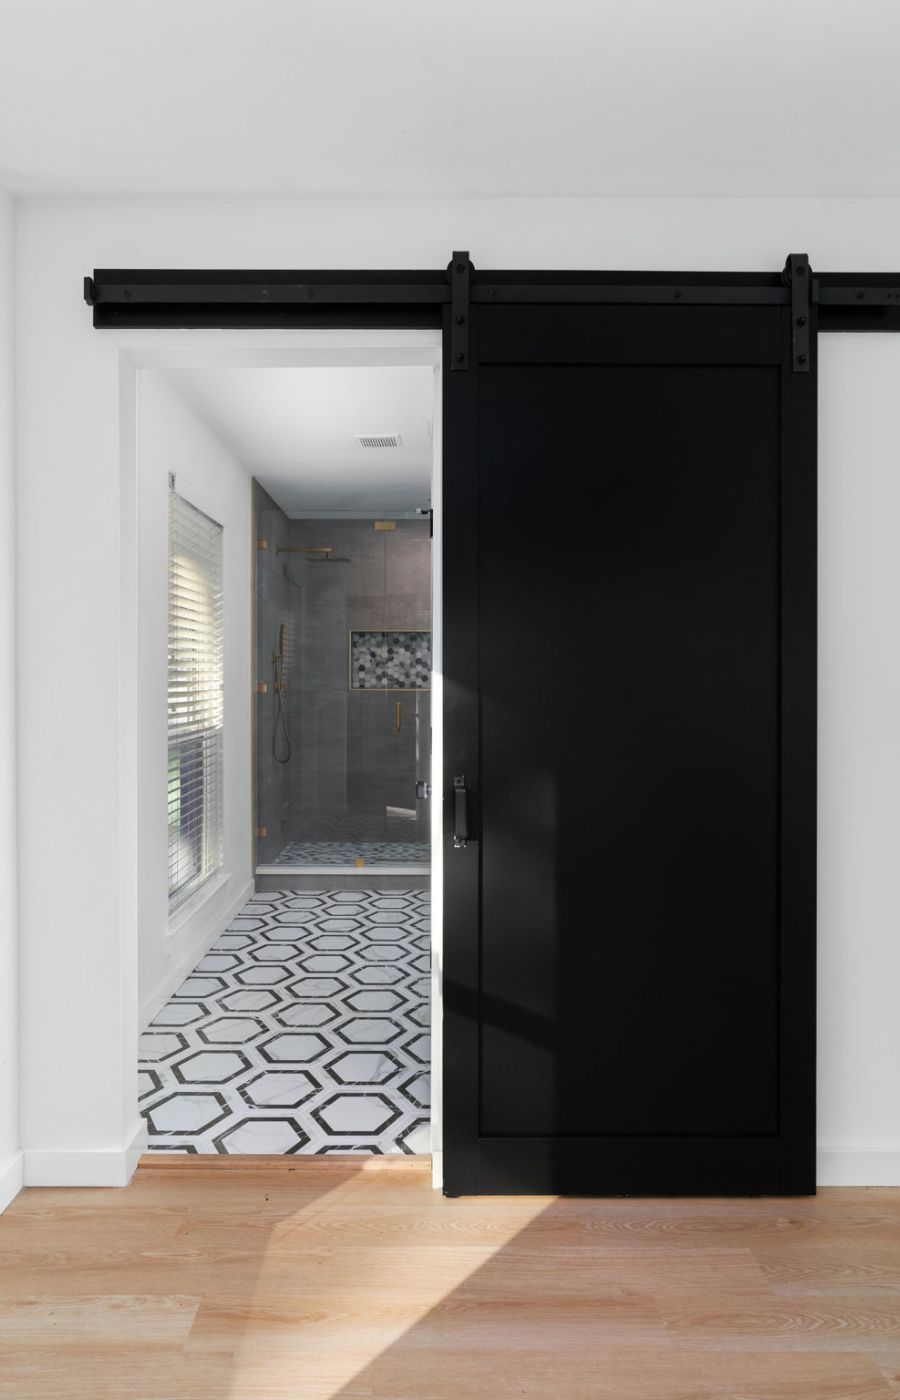 A striking black barn door in the bathroom, adds a bold and rustic touch to the space. The door stands out against the neutral tones of the bathroom, creating a visually appealing contrast. Its design brings a sense of farmhouse charm and character to the modern setting, enhancing the overall aesthetic with a touch of industrial style. The black barn door serves as a unique and eye-catching feature, offering both functionality and visual interest in the primary room.